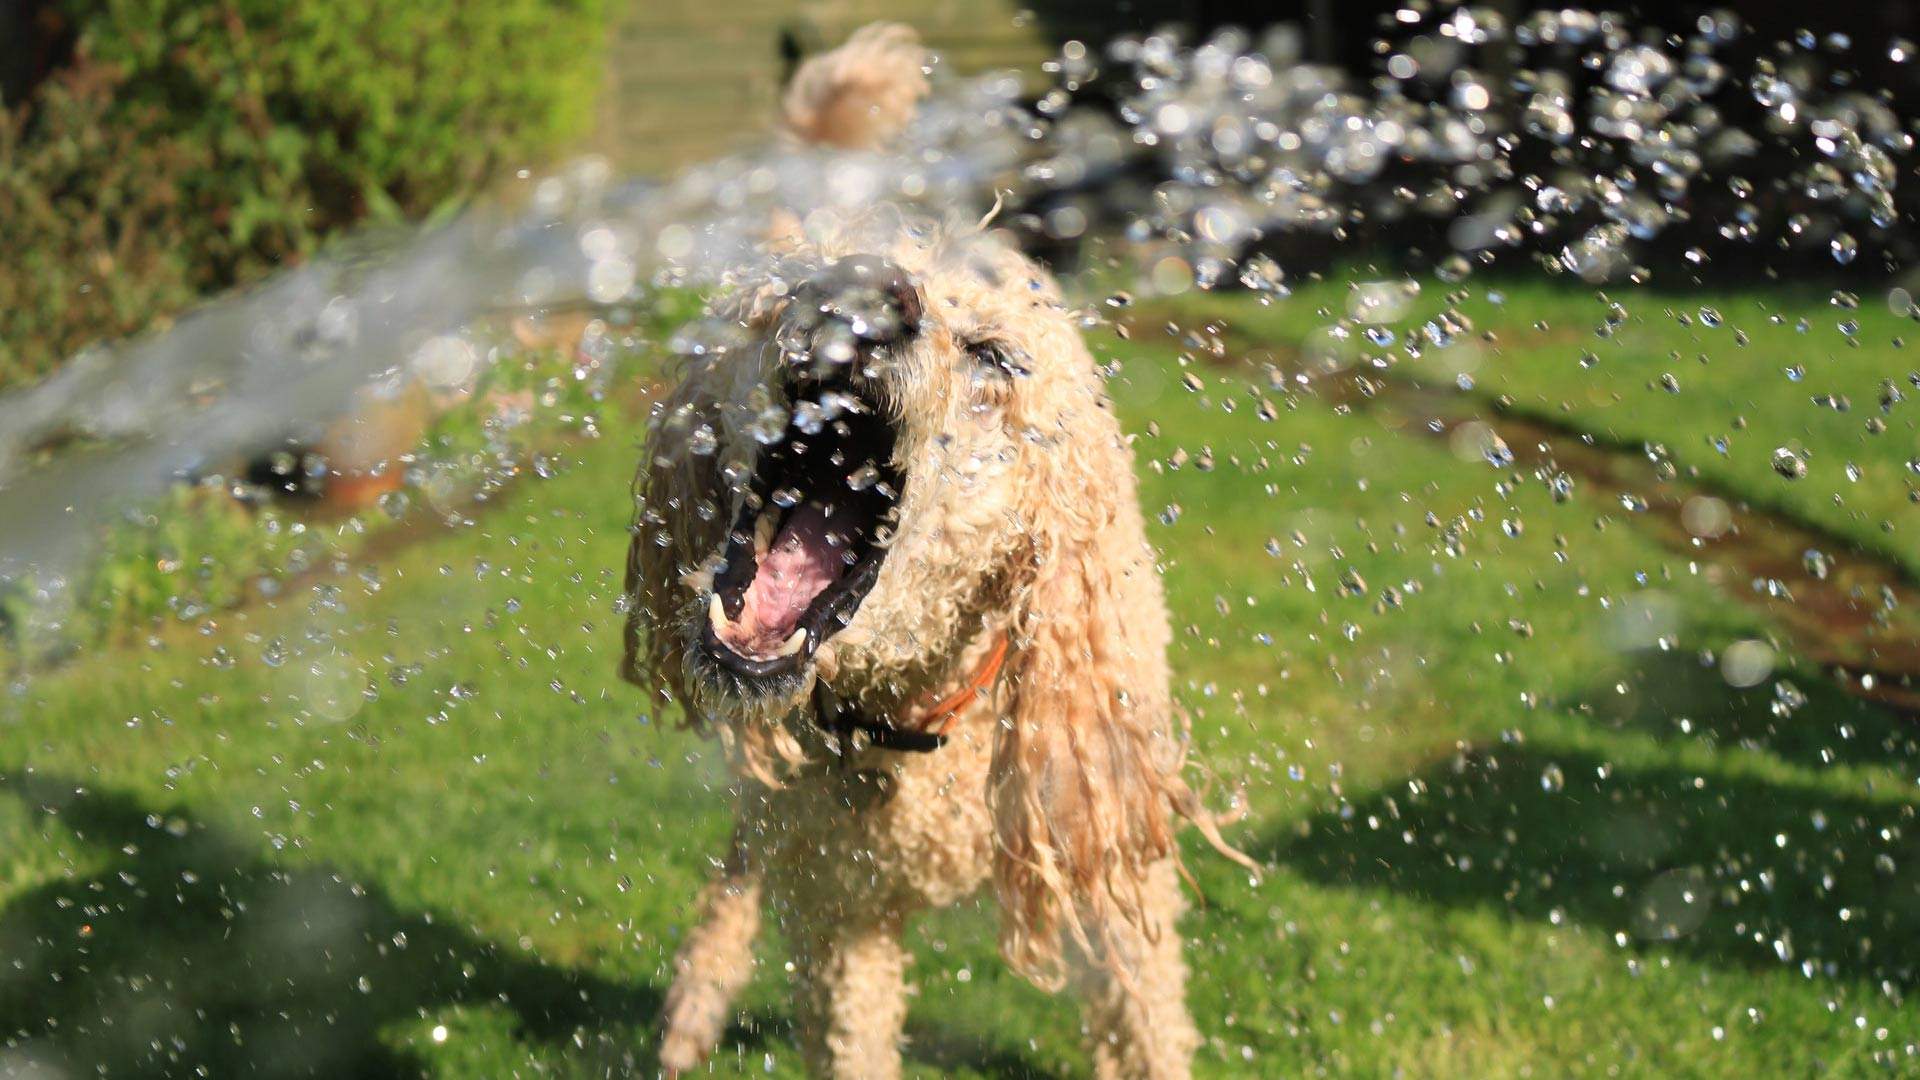 How to Keep Your Pets Happy and Healthy During Scorching Summer Weather